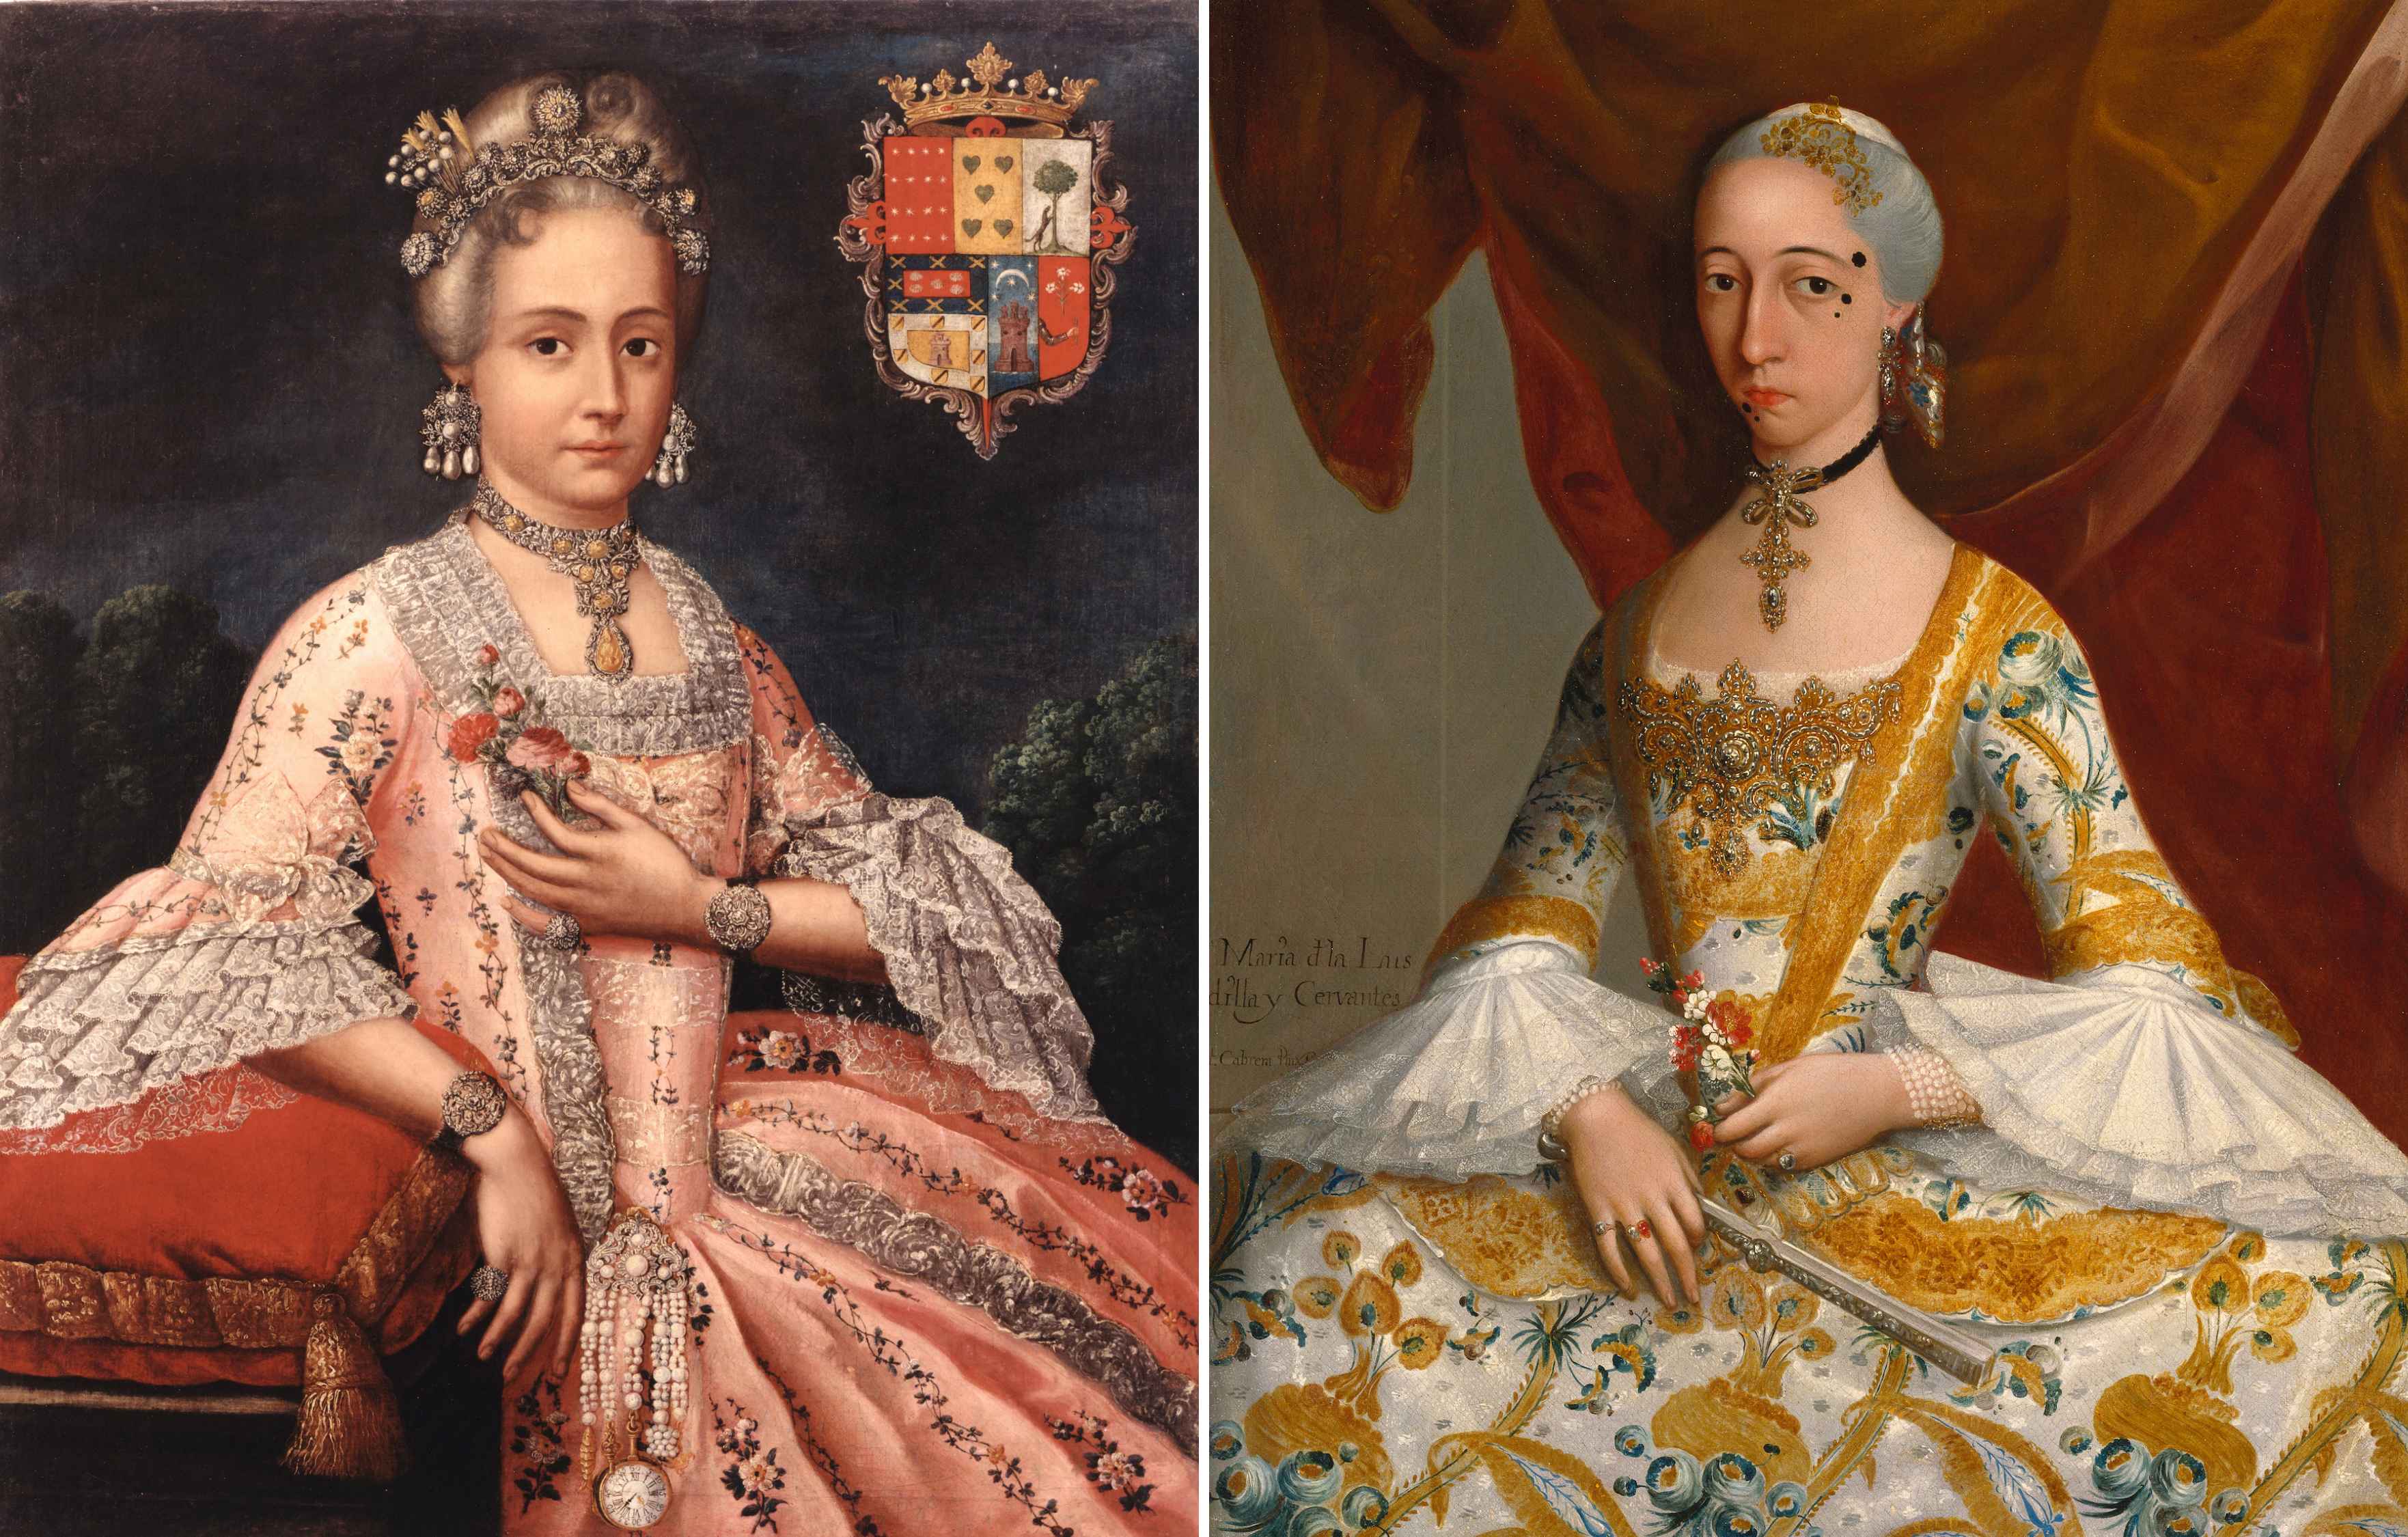 Two portraits of different women from the 18th-century wearing very ornate dresses and wigs